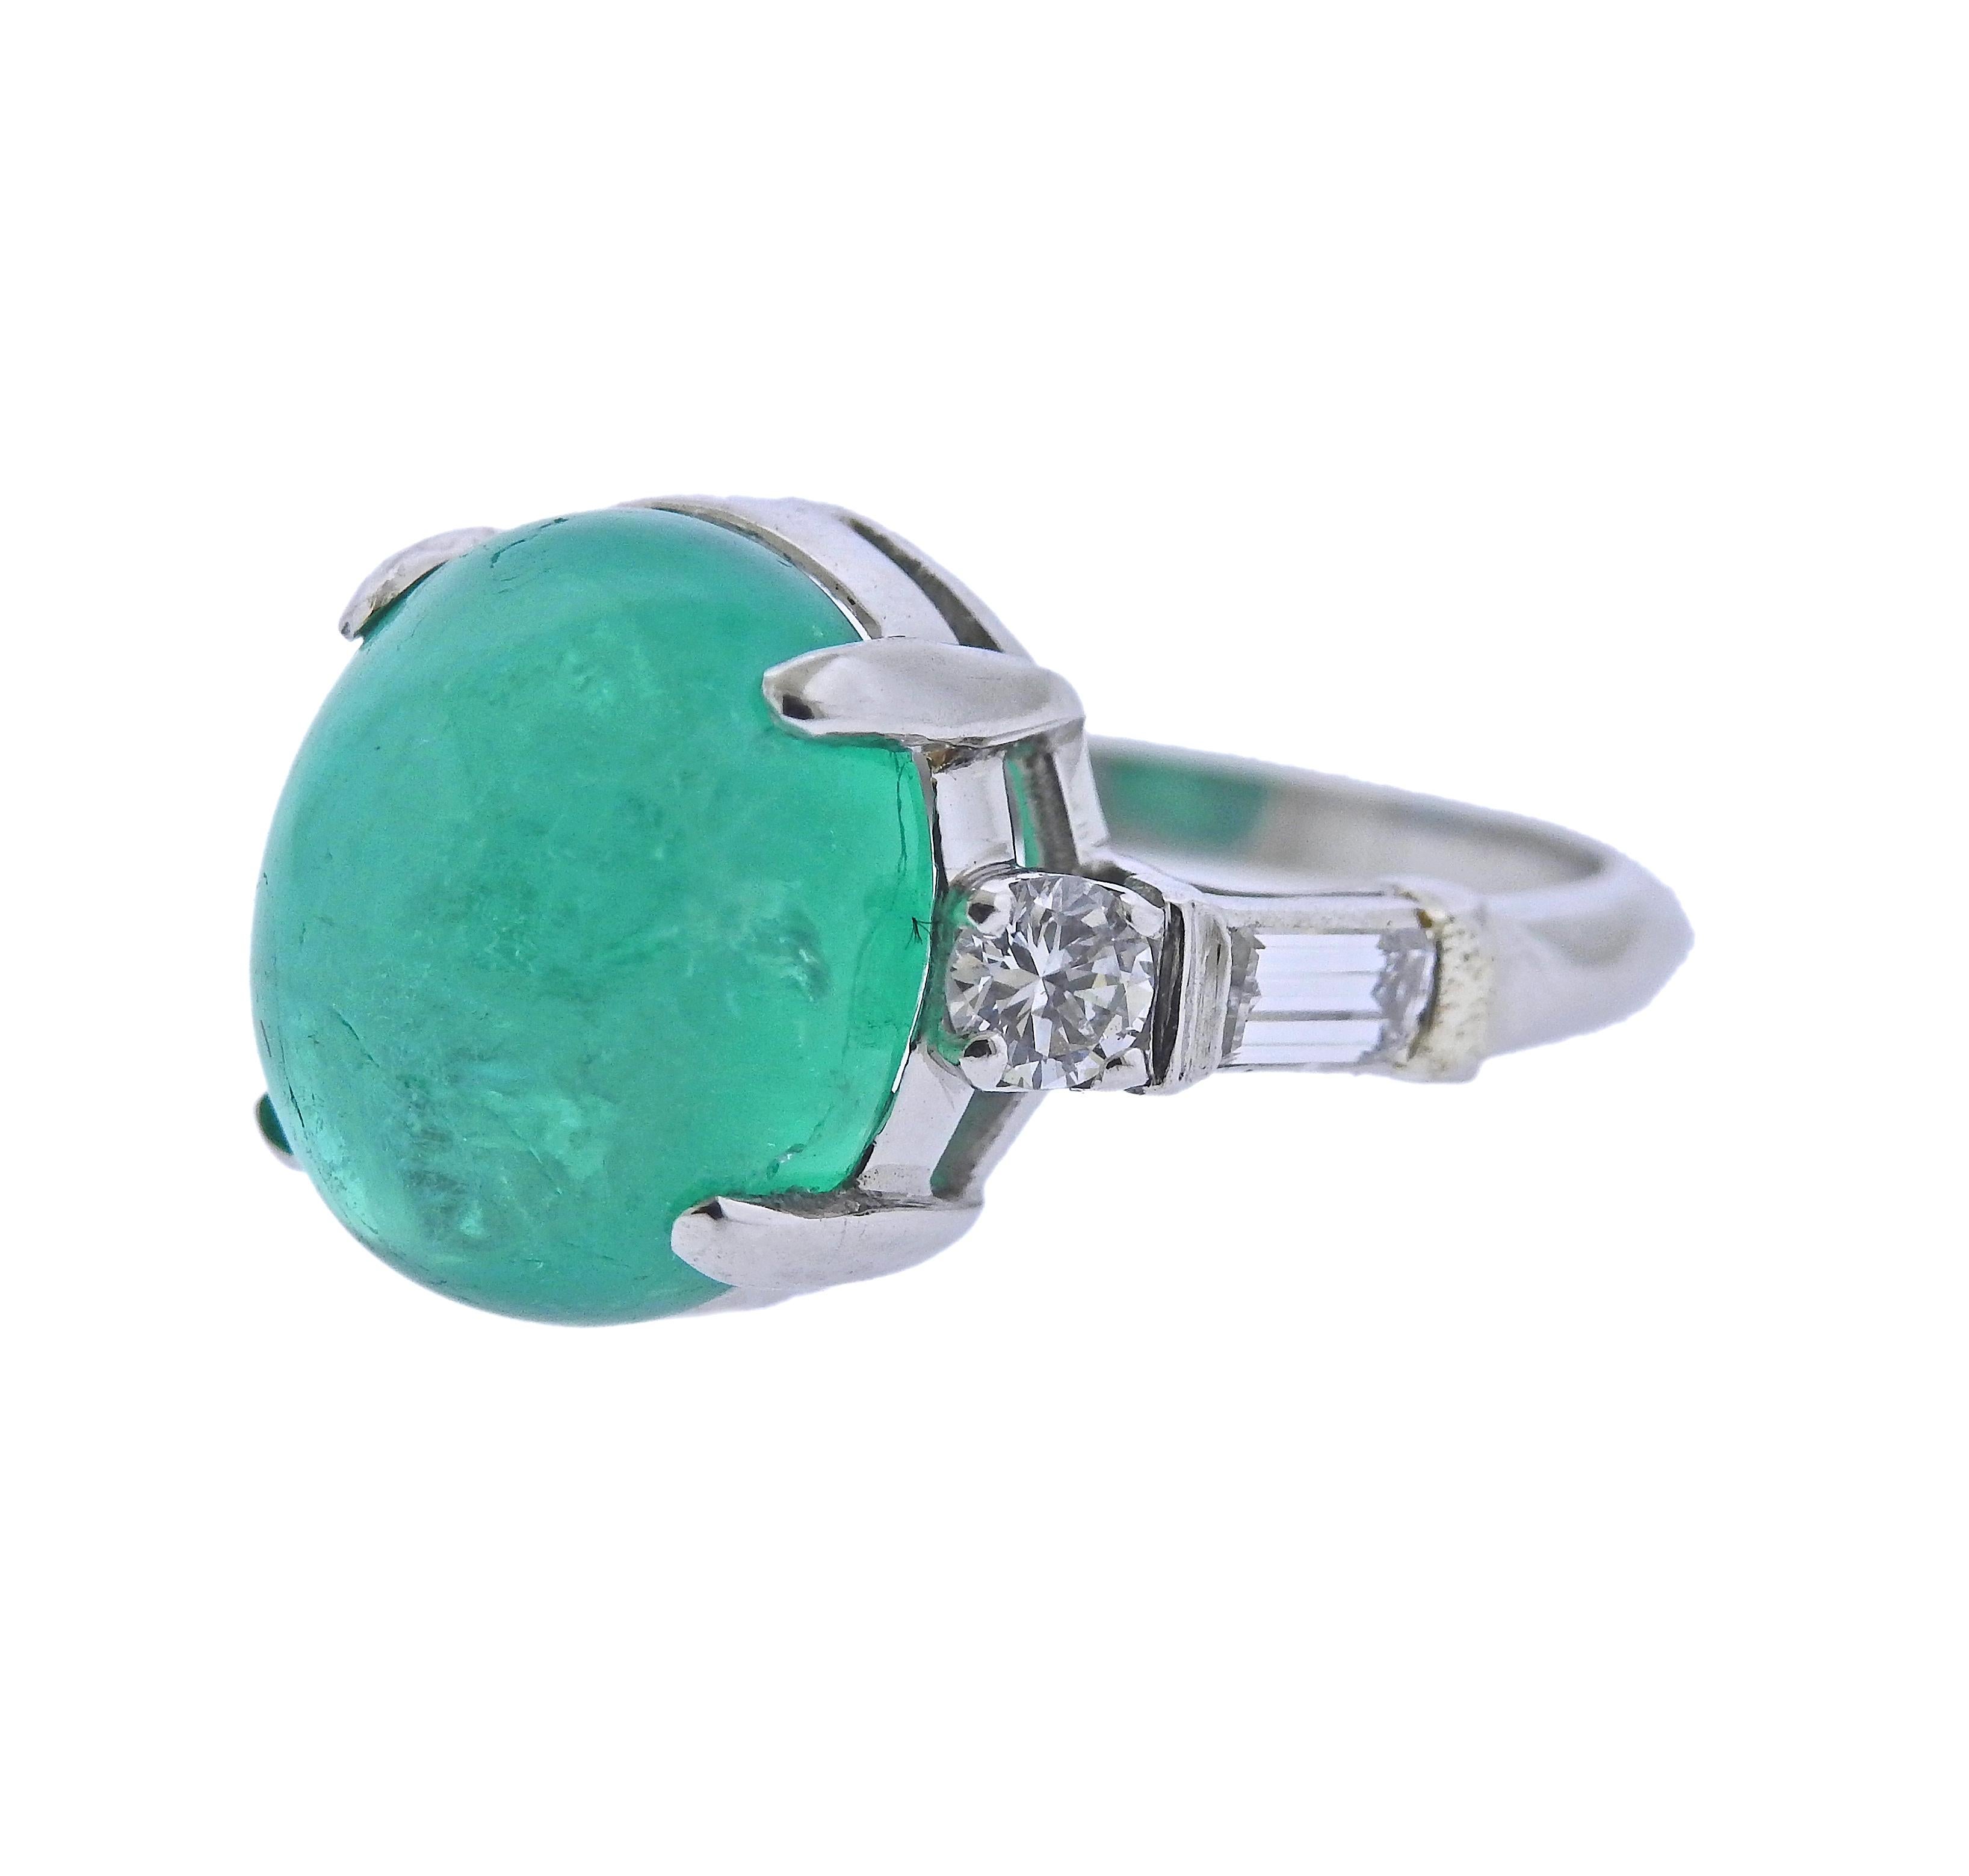 Platinum ring, set with center approx. 9 carat emerald cabochon (measuring approx. 12.71 x 10.6 x 8.7mm) with 0.44ctw in diamonds. Ring size - 5.5. Marked Plat. Weight - 7.2 grams.